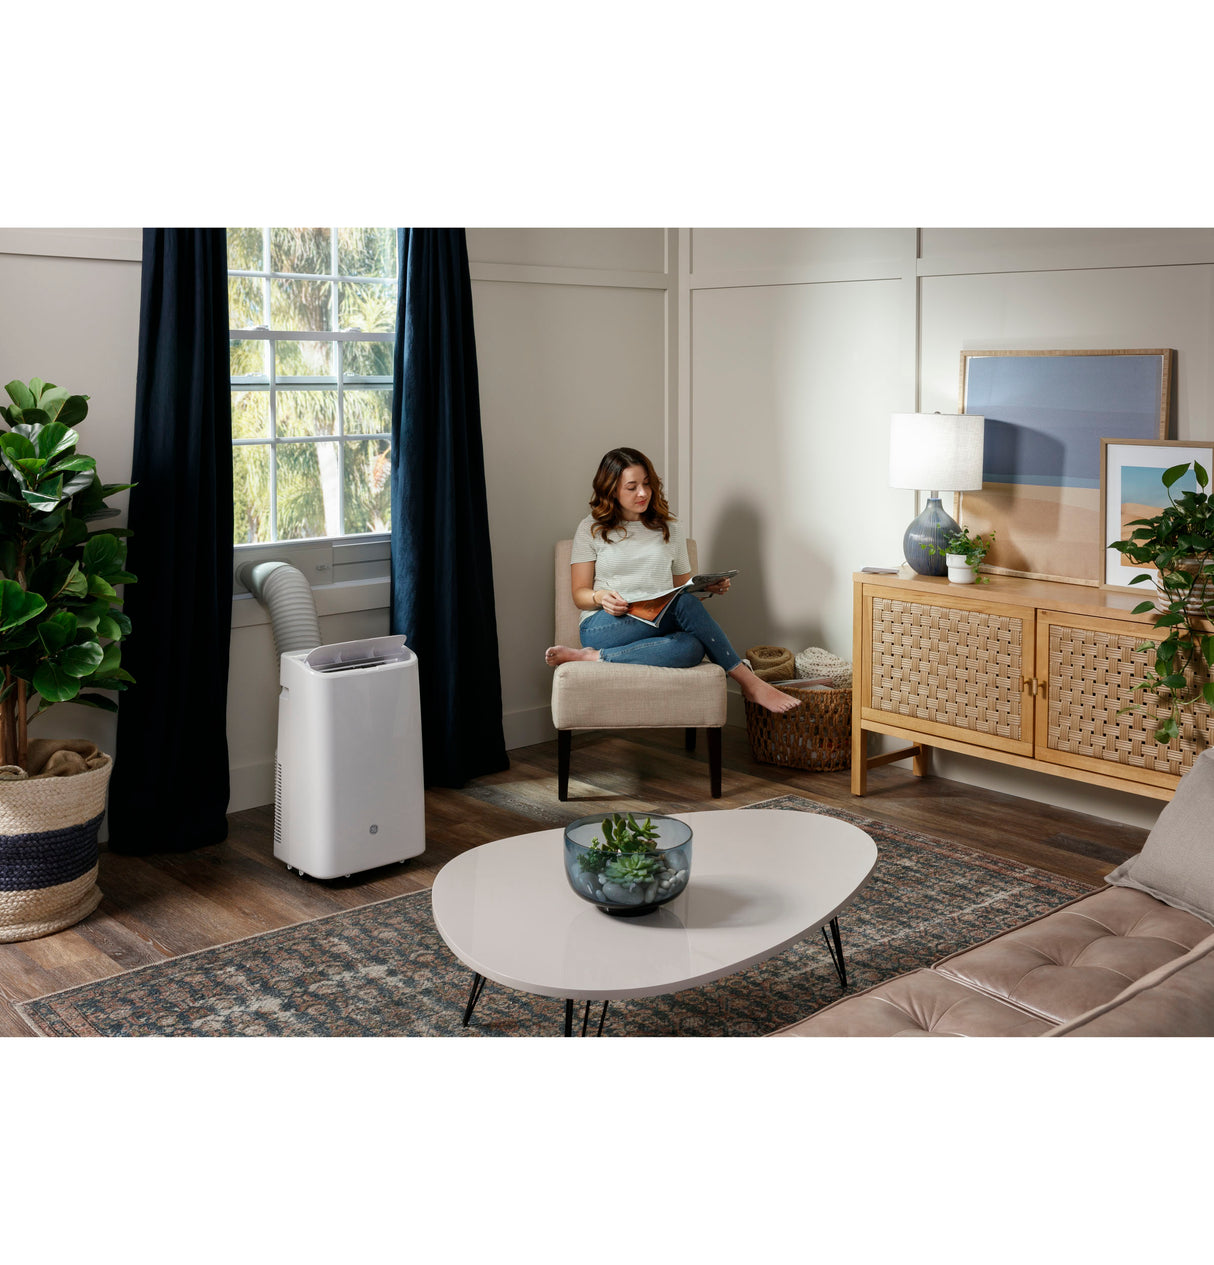 GE(R) 8,500 BTU Portable Air Conditioner with Dehumifier and Remote, White - (APCD08JASW)